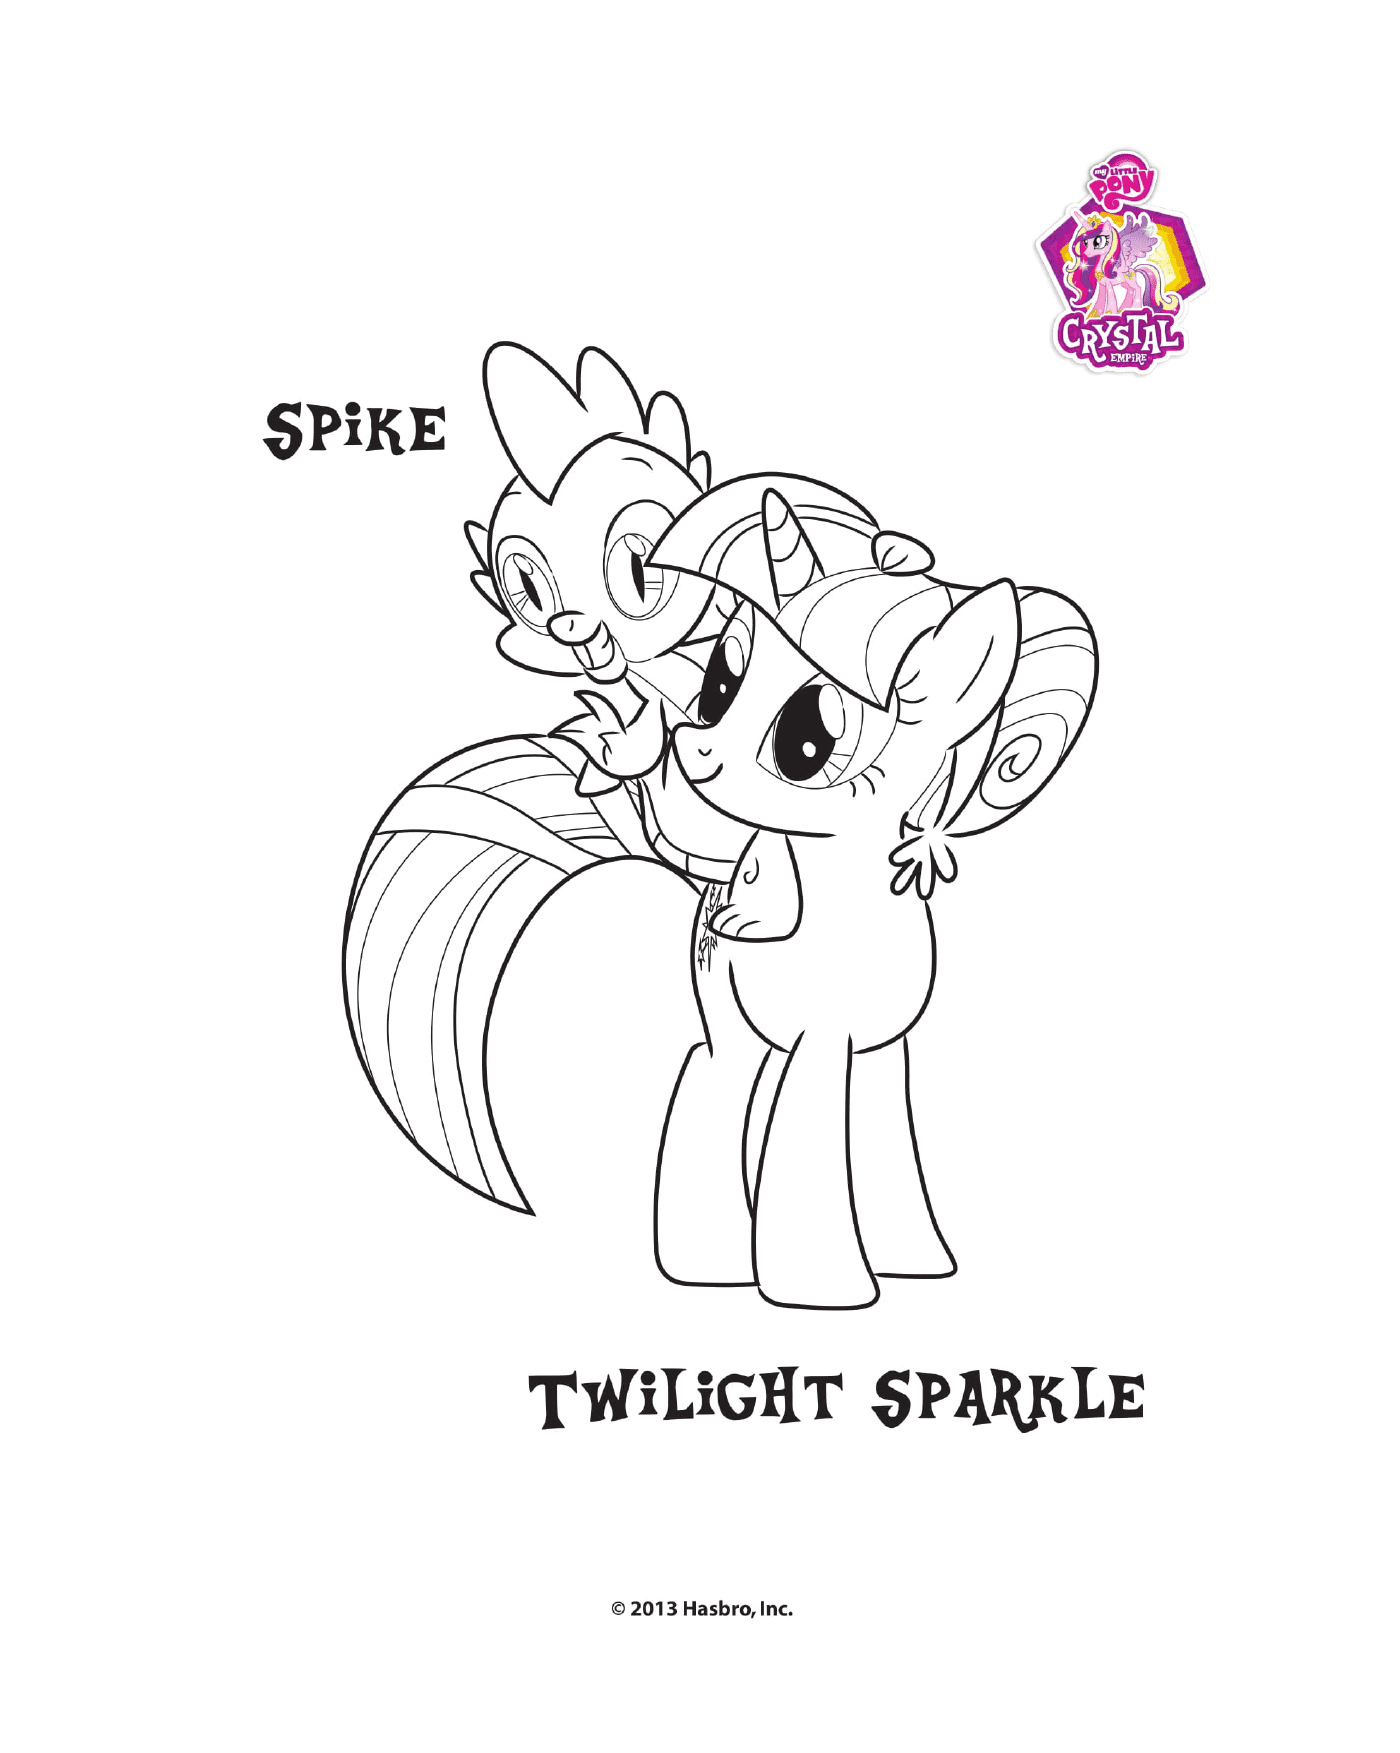  Spike and Twilight Sparkle at the Crystal Empire 